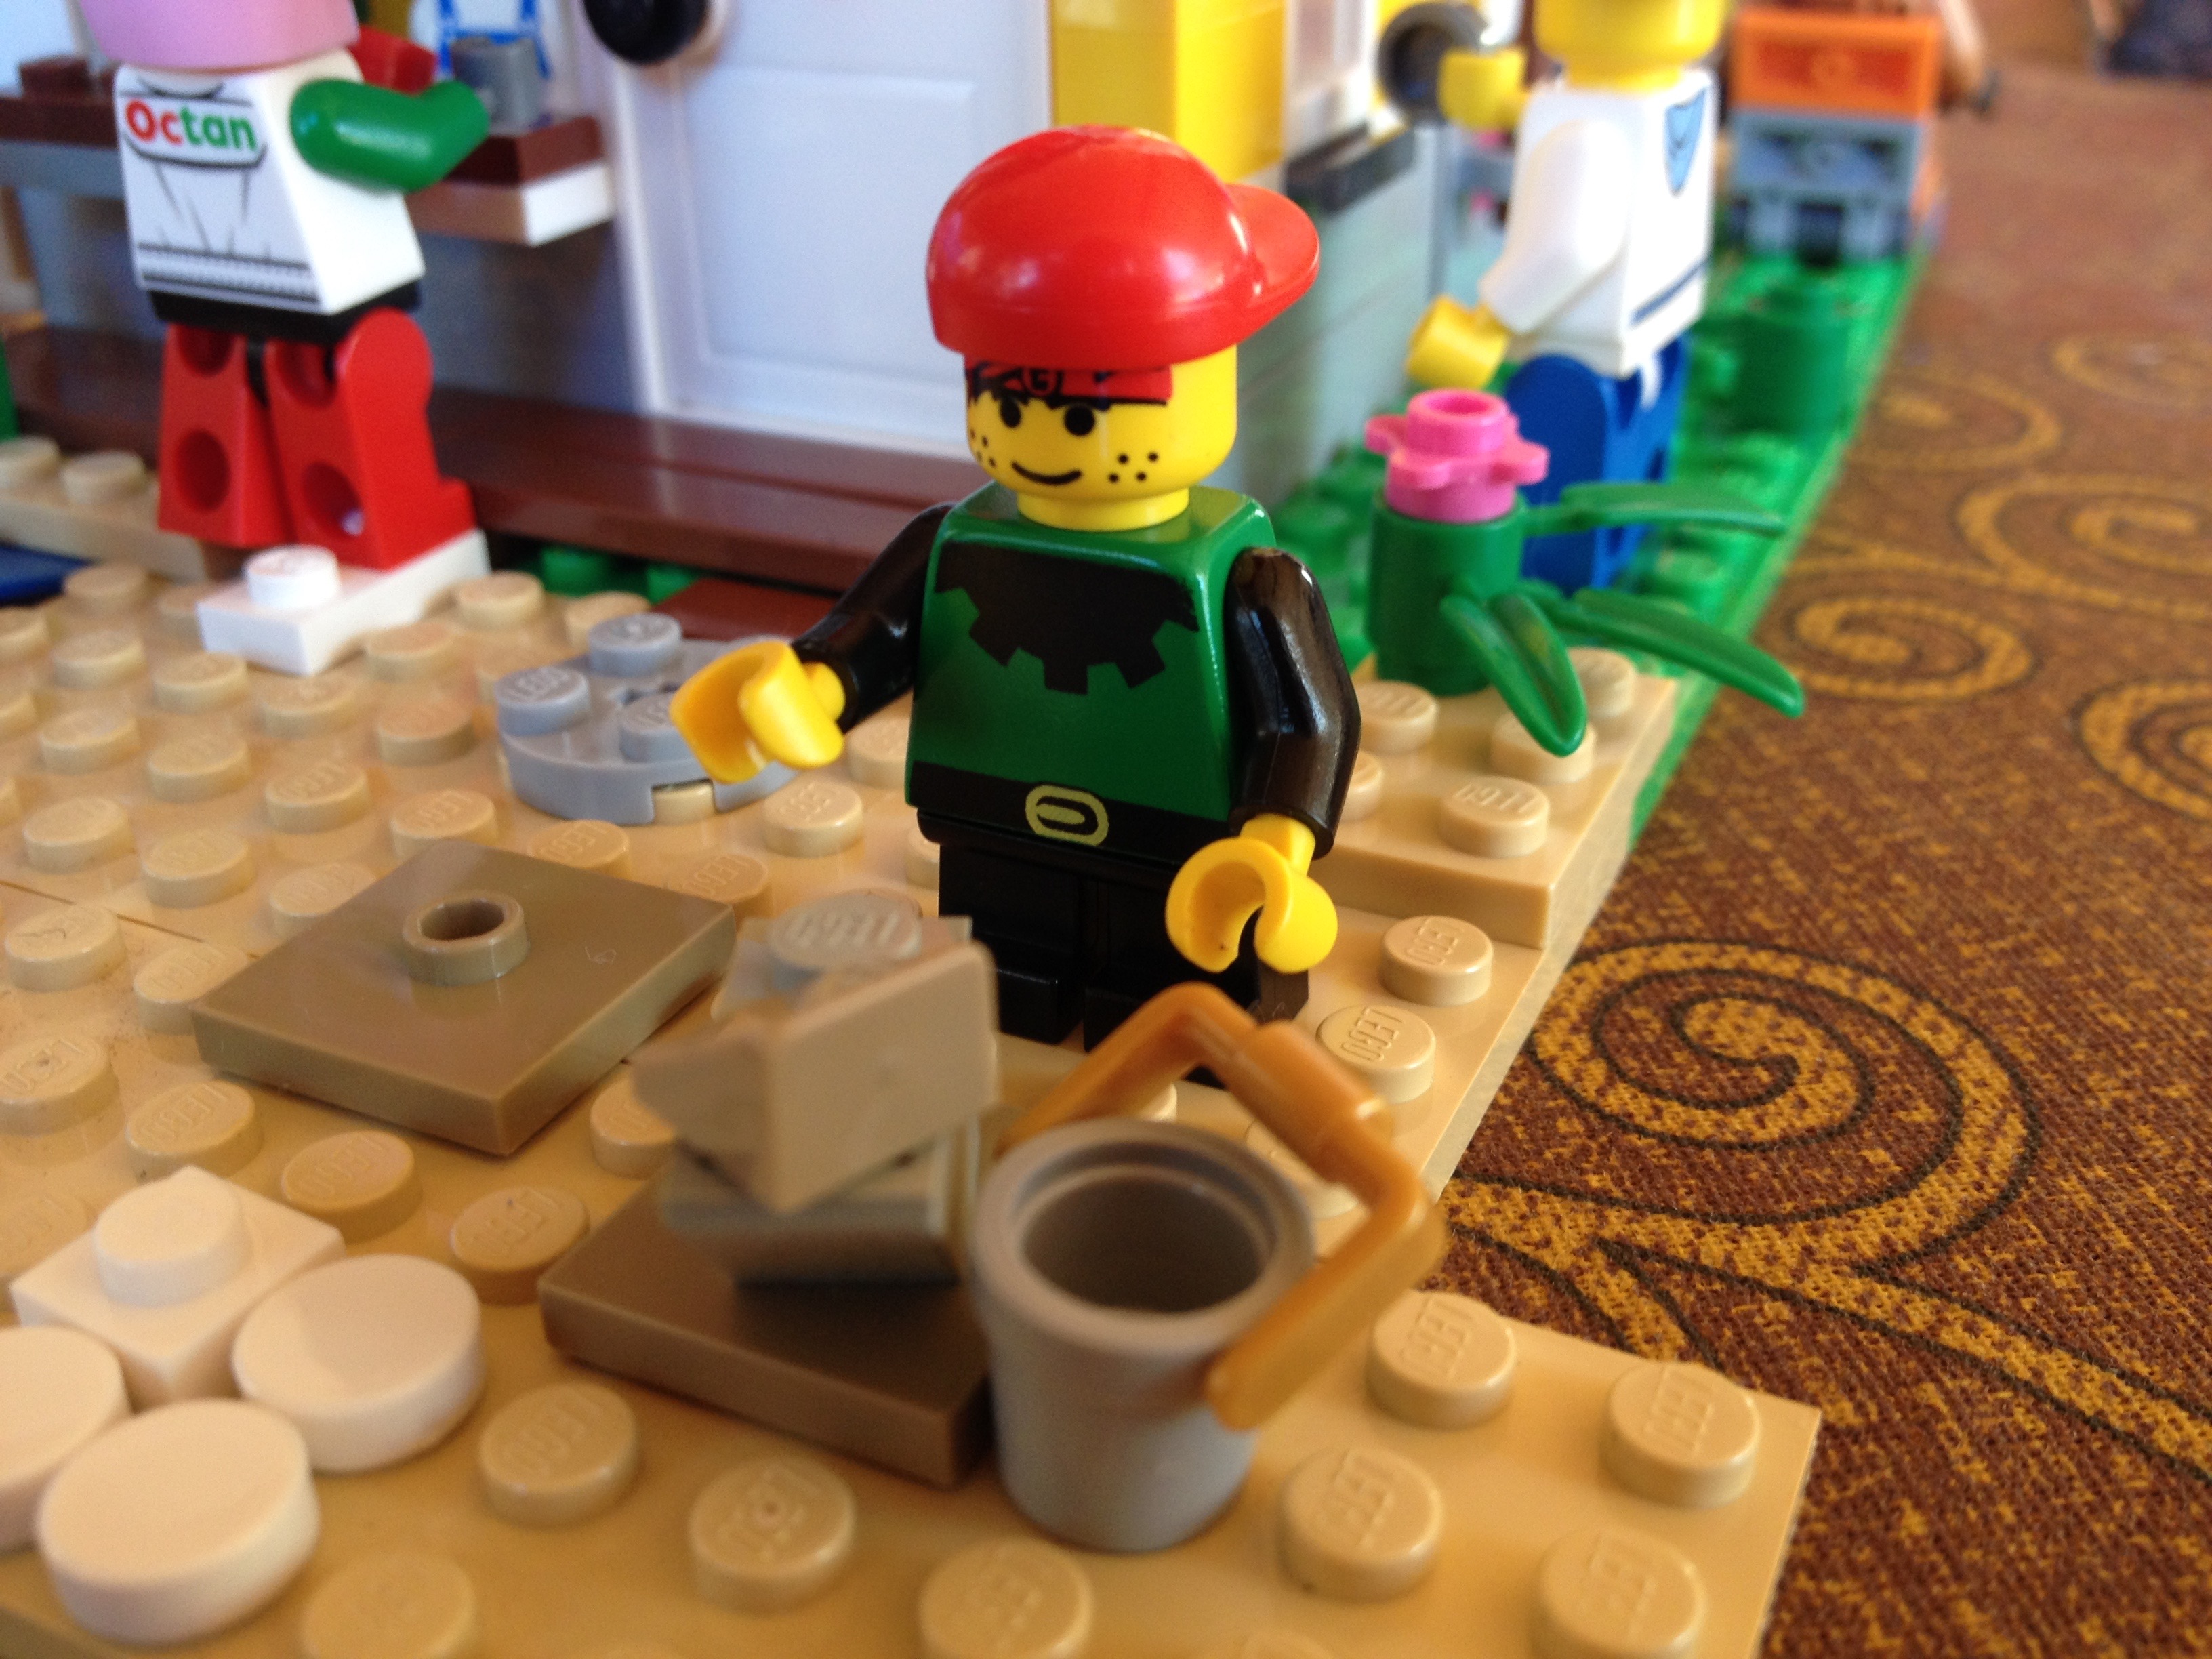 A cute little lego kid with a red baseball cap is building a lego sandcastle on the beach.